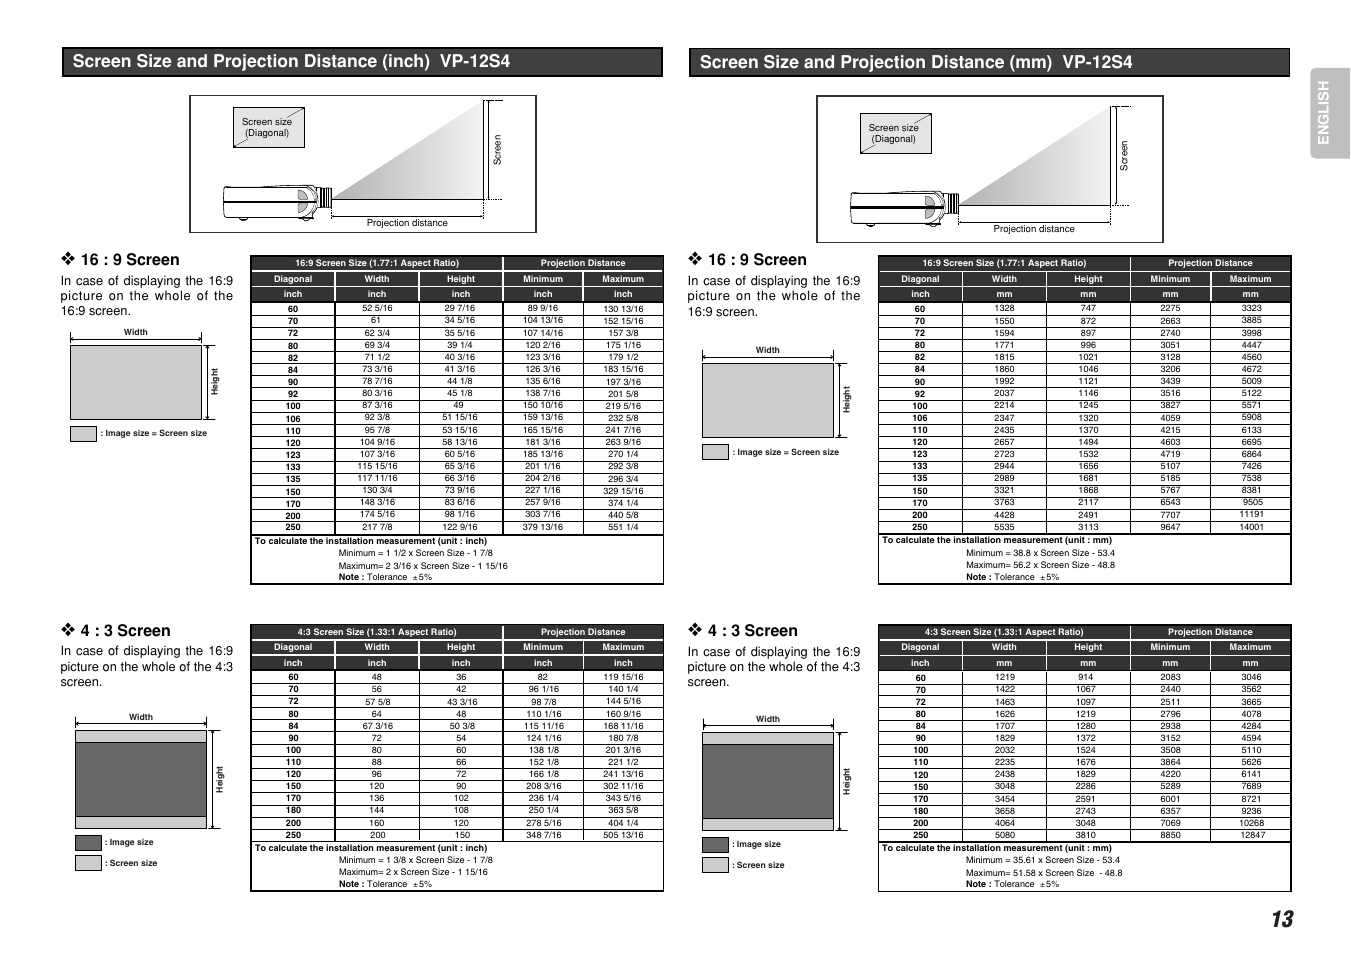 Vp-12s1, Screen size and projection distance (inch) vp-12s4, Screen size and projection distance (mm) vp-12s4 | 16 : 9 screen, 4 : 3 screen, English | Marantz VP-12S4 User Manual | Page 19 / 37